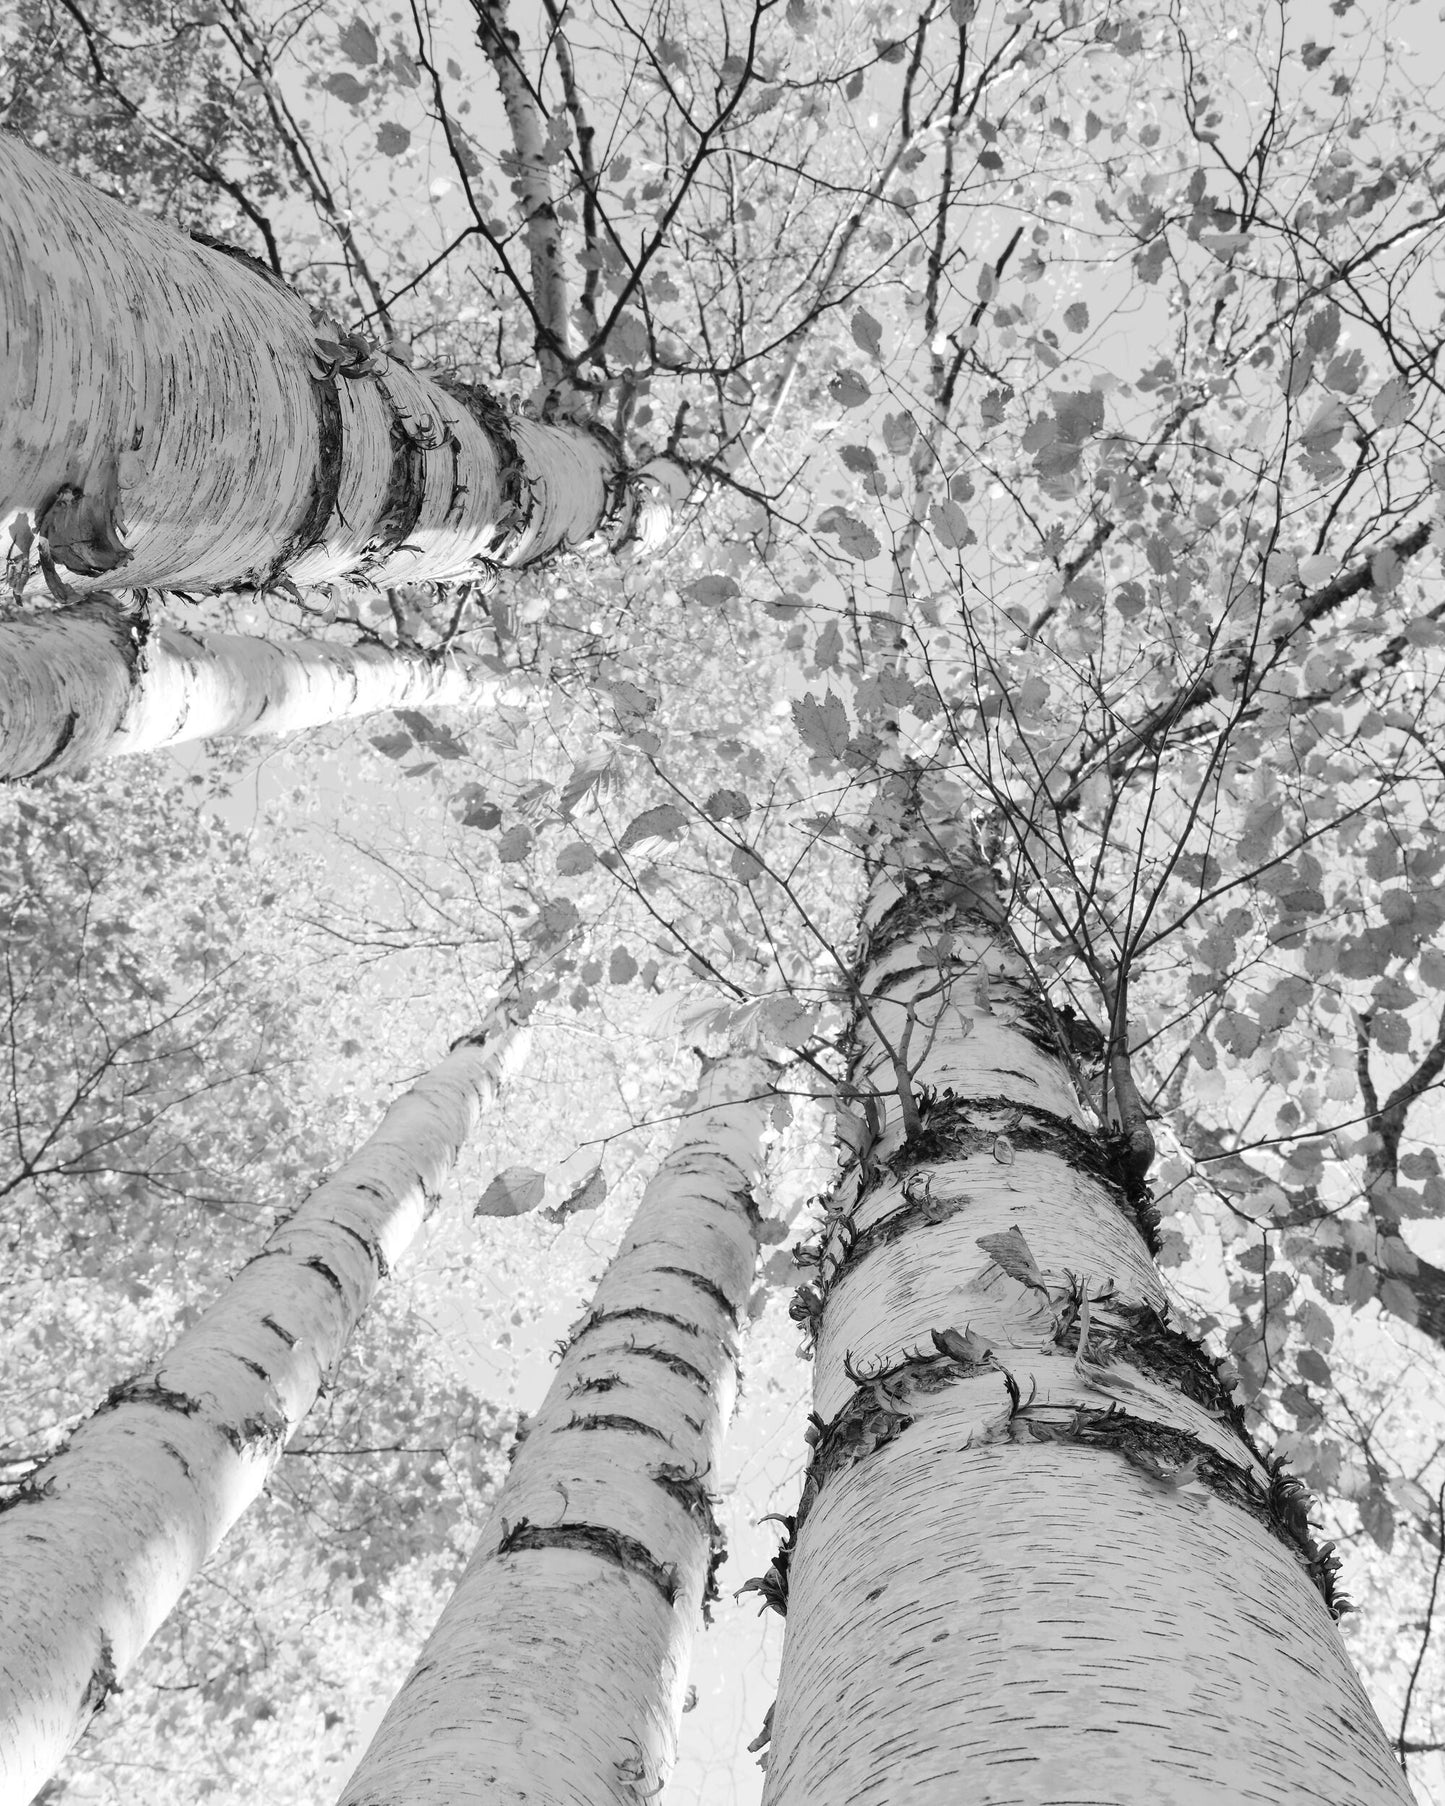 VERTICAL Birch Tree Canopy print, Door County photo, black and white picture, birch tree wall art, large canvas decor, 5x7 8x10 11x14 40x60"